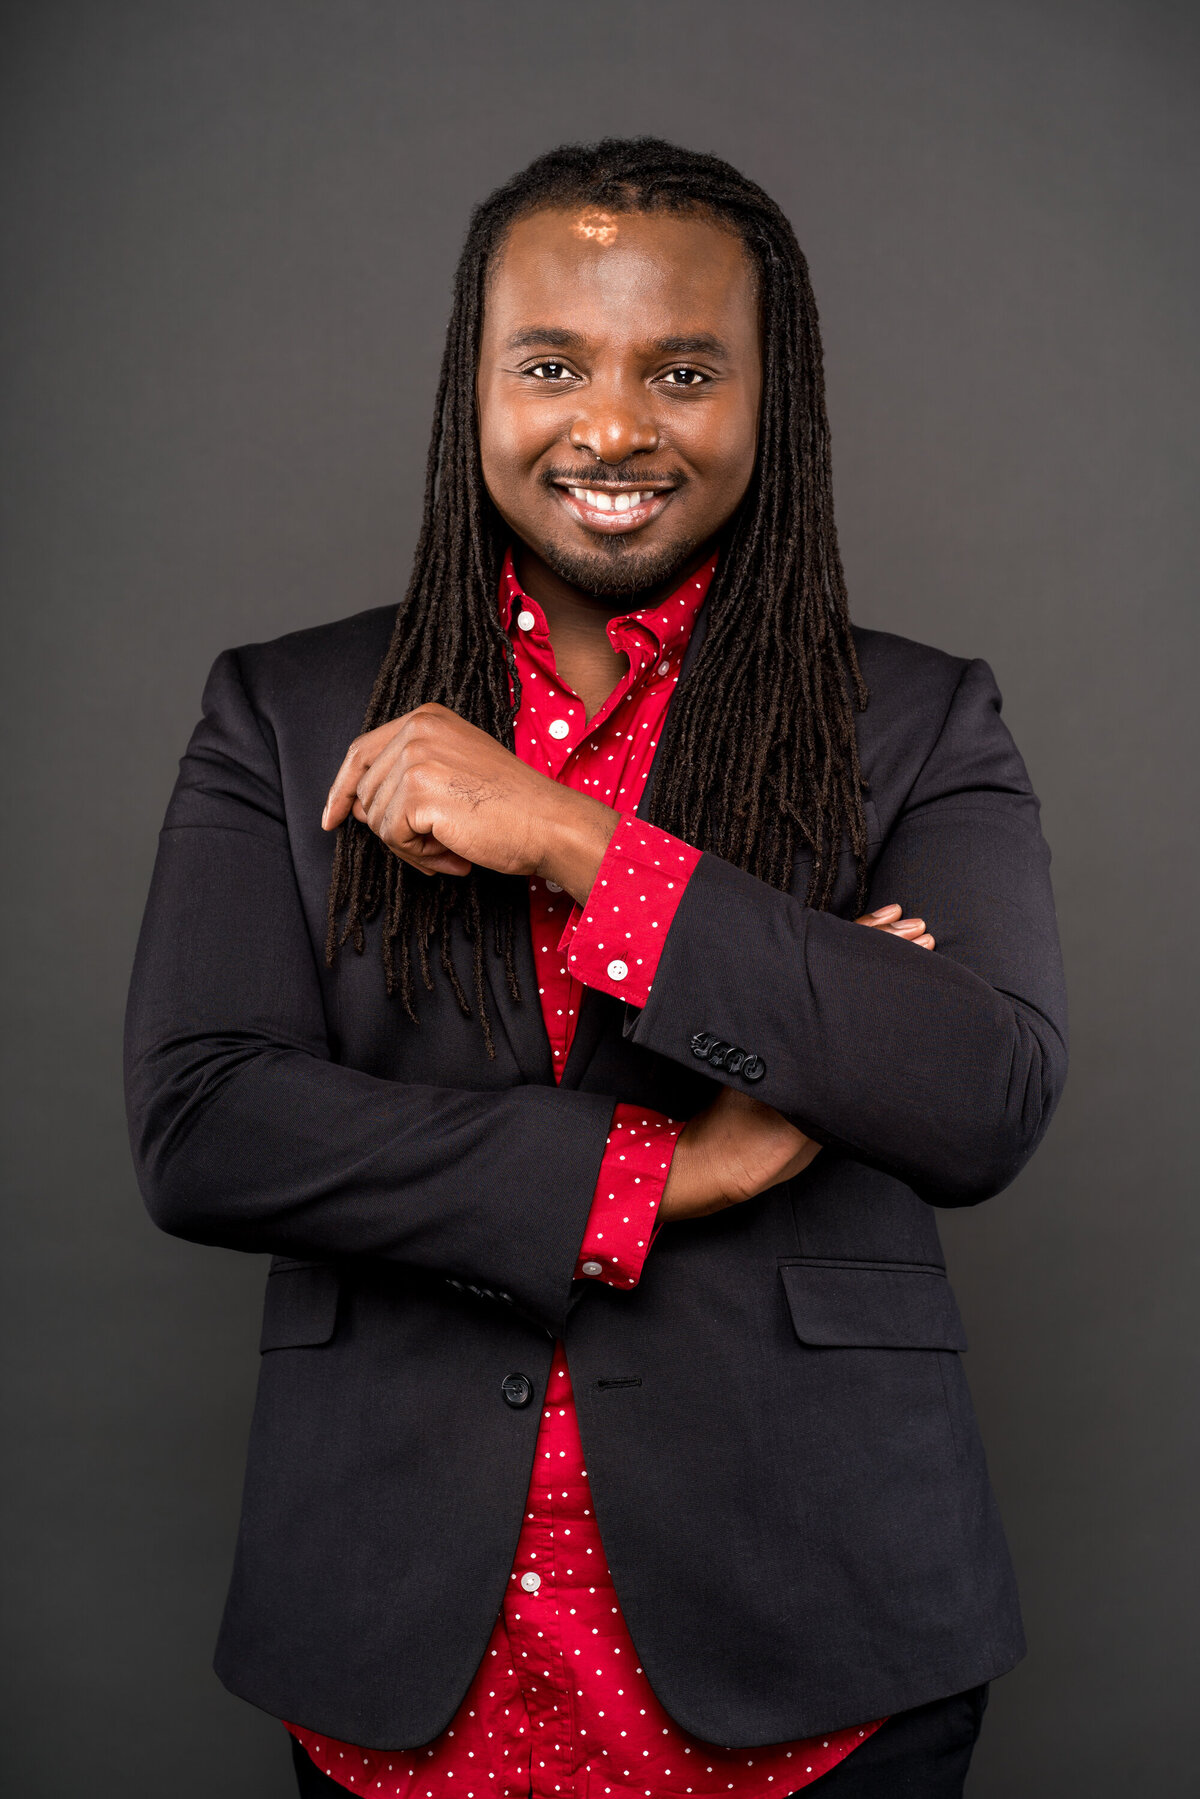 Black male with dreadlocks in blazer and red and white polka dot shirt